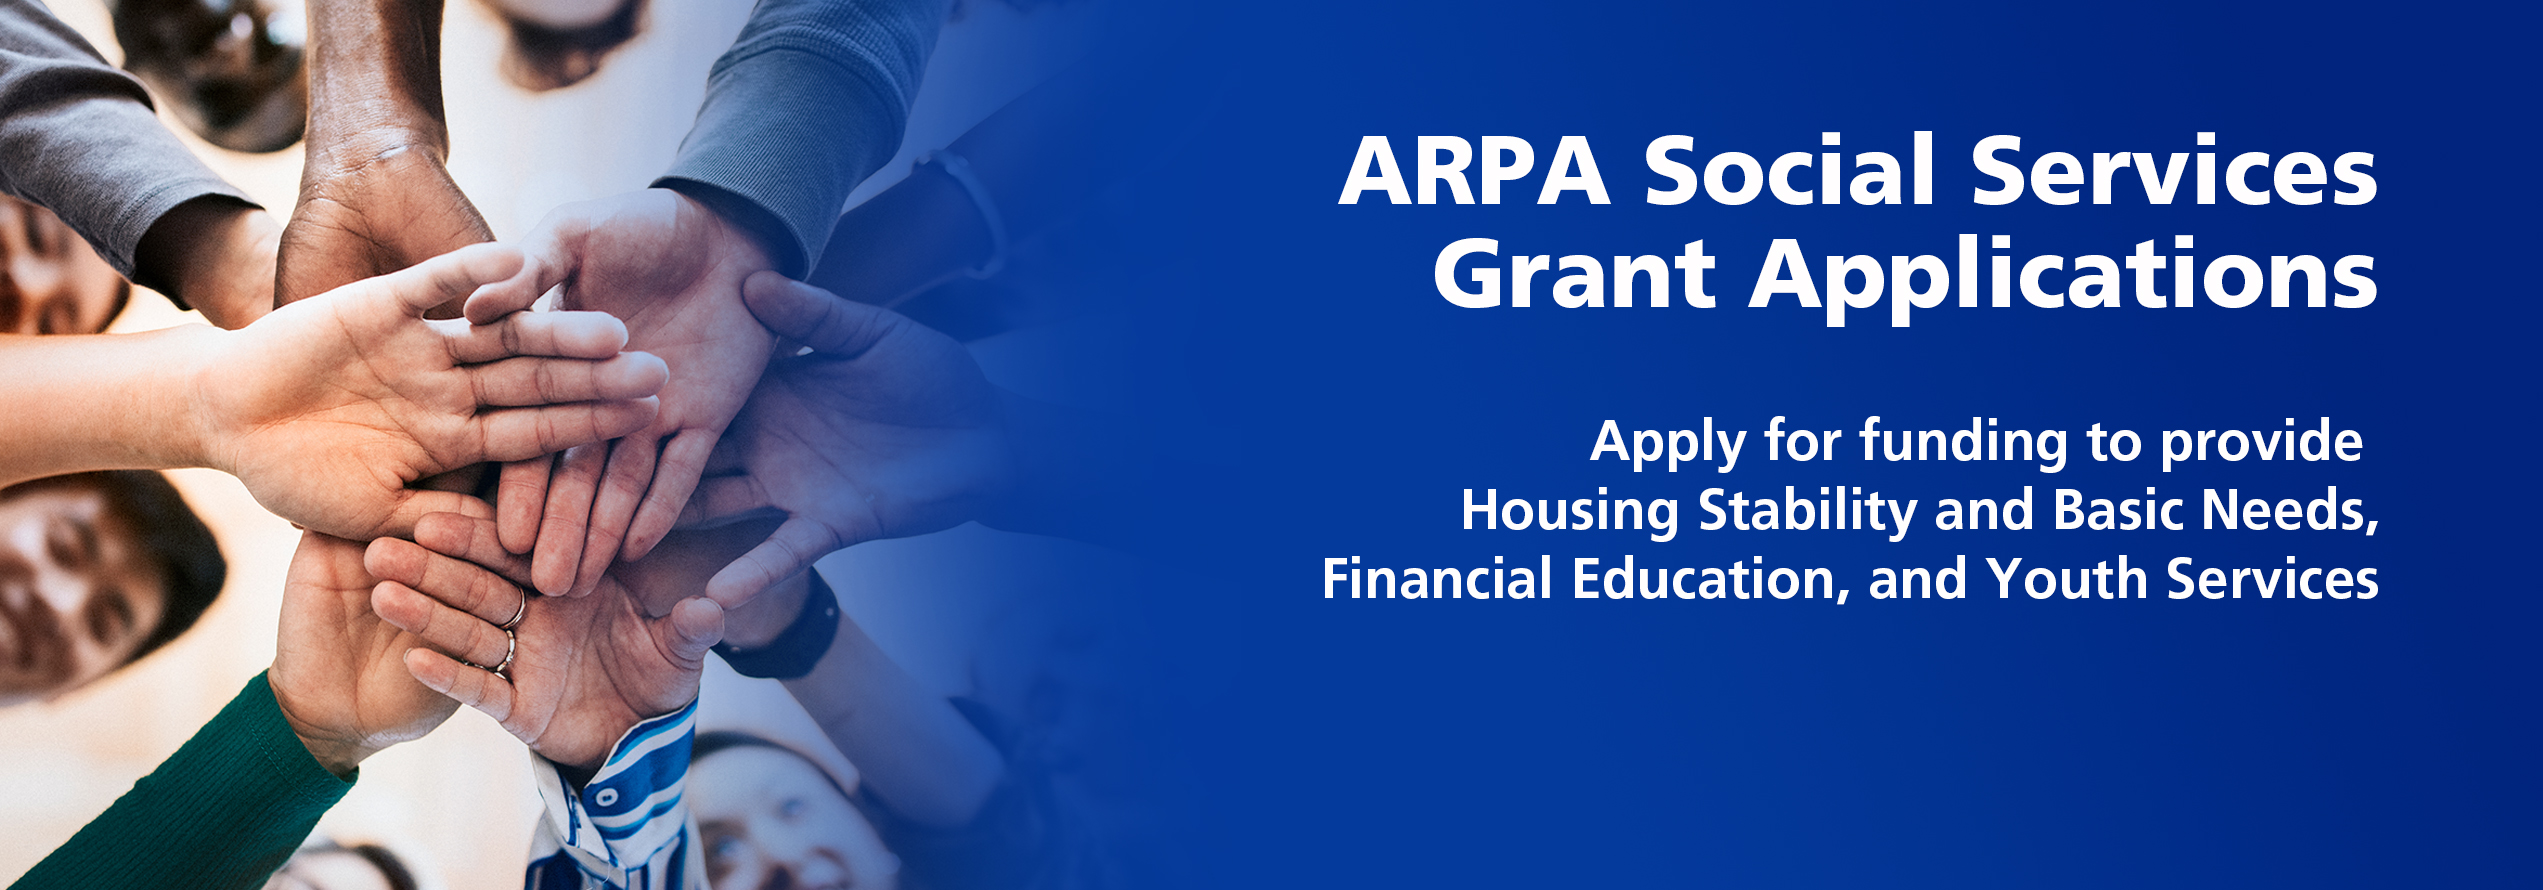 ARPA Social Services Grant Applications